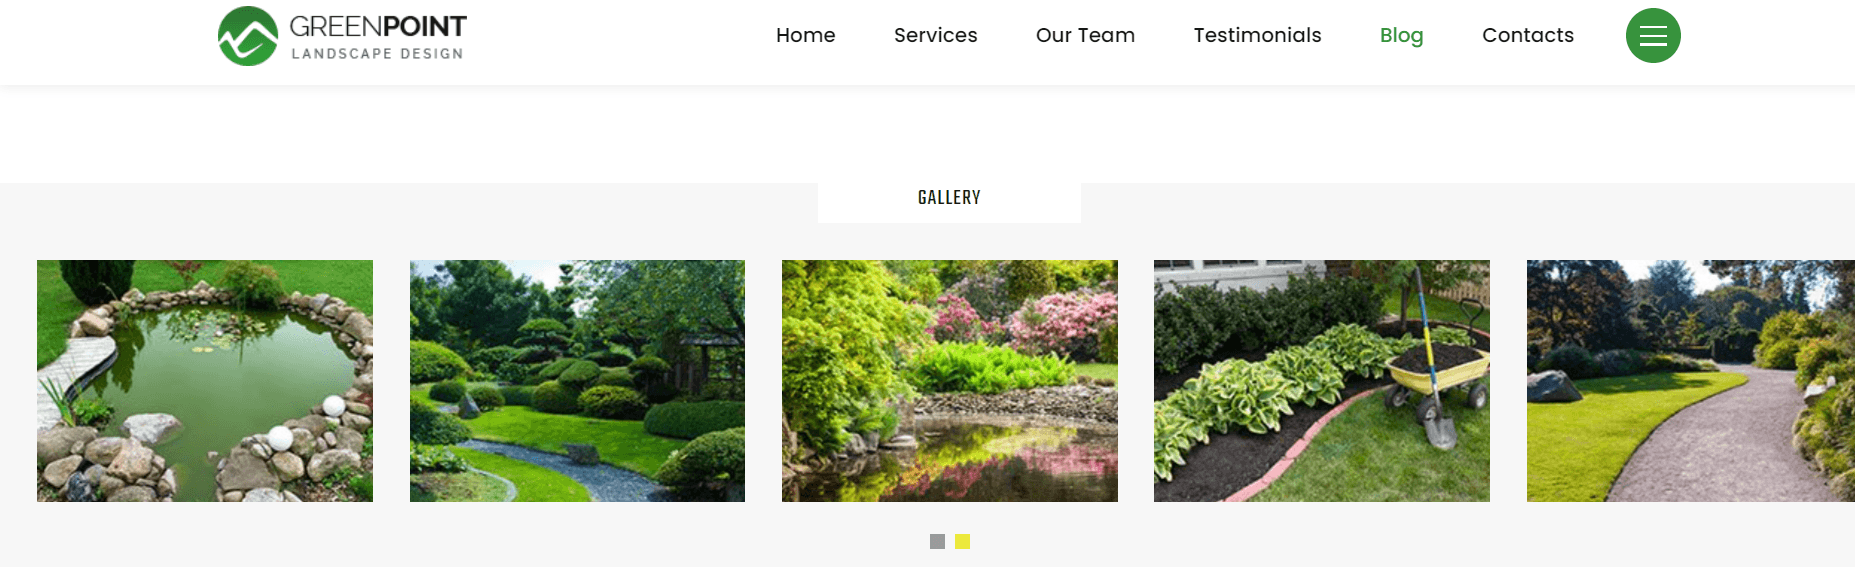 hardscape visually appealing website example